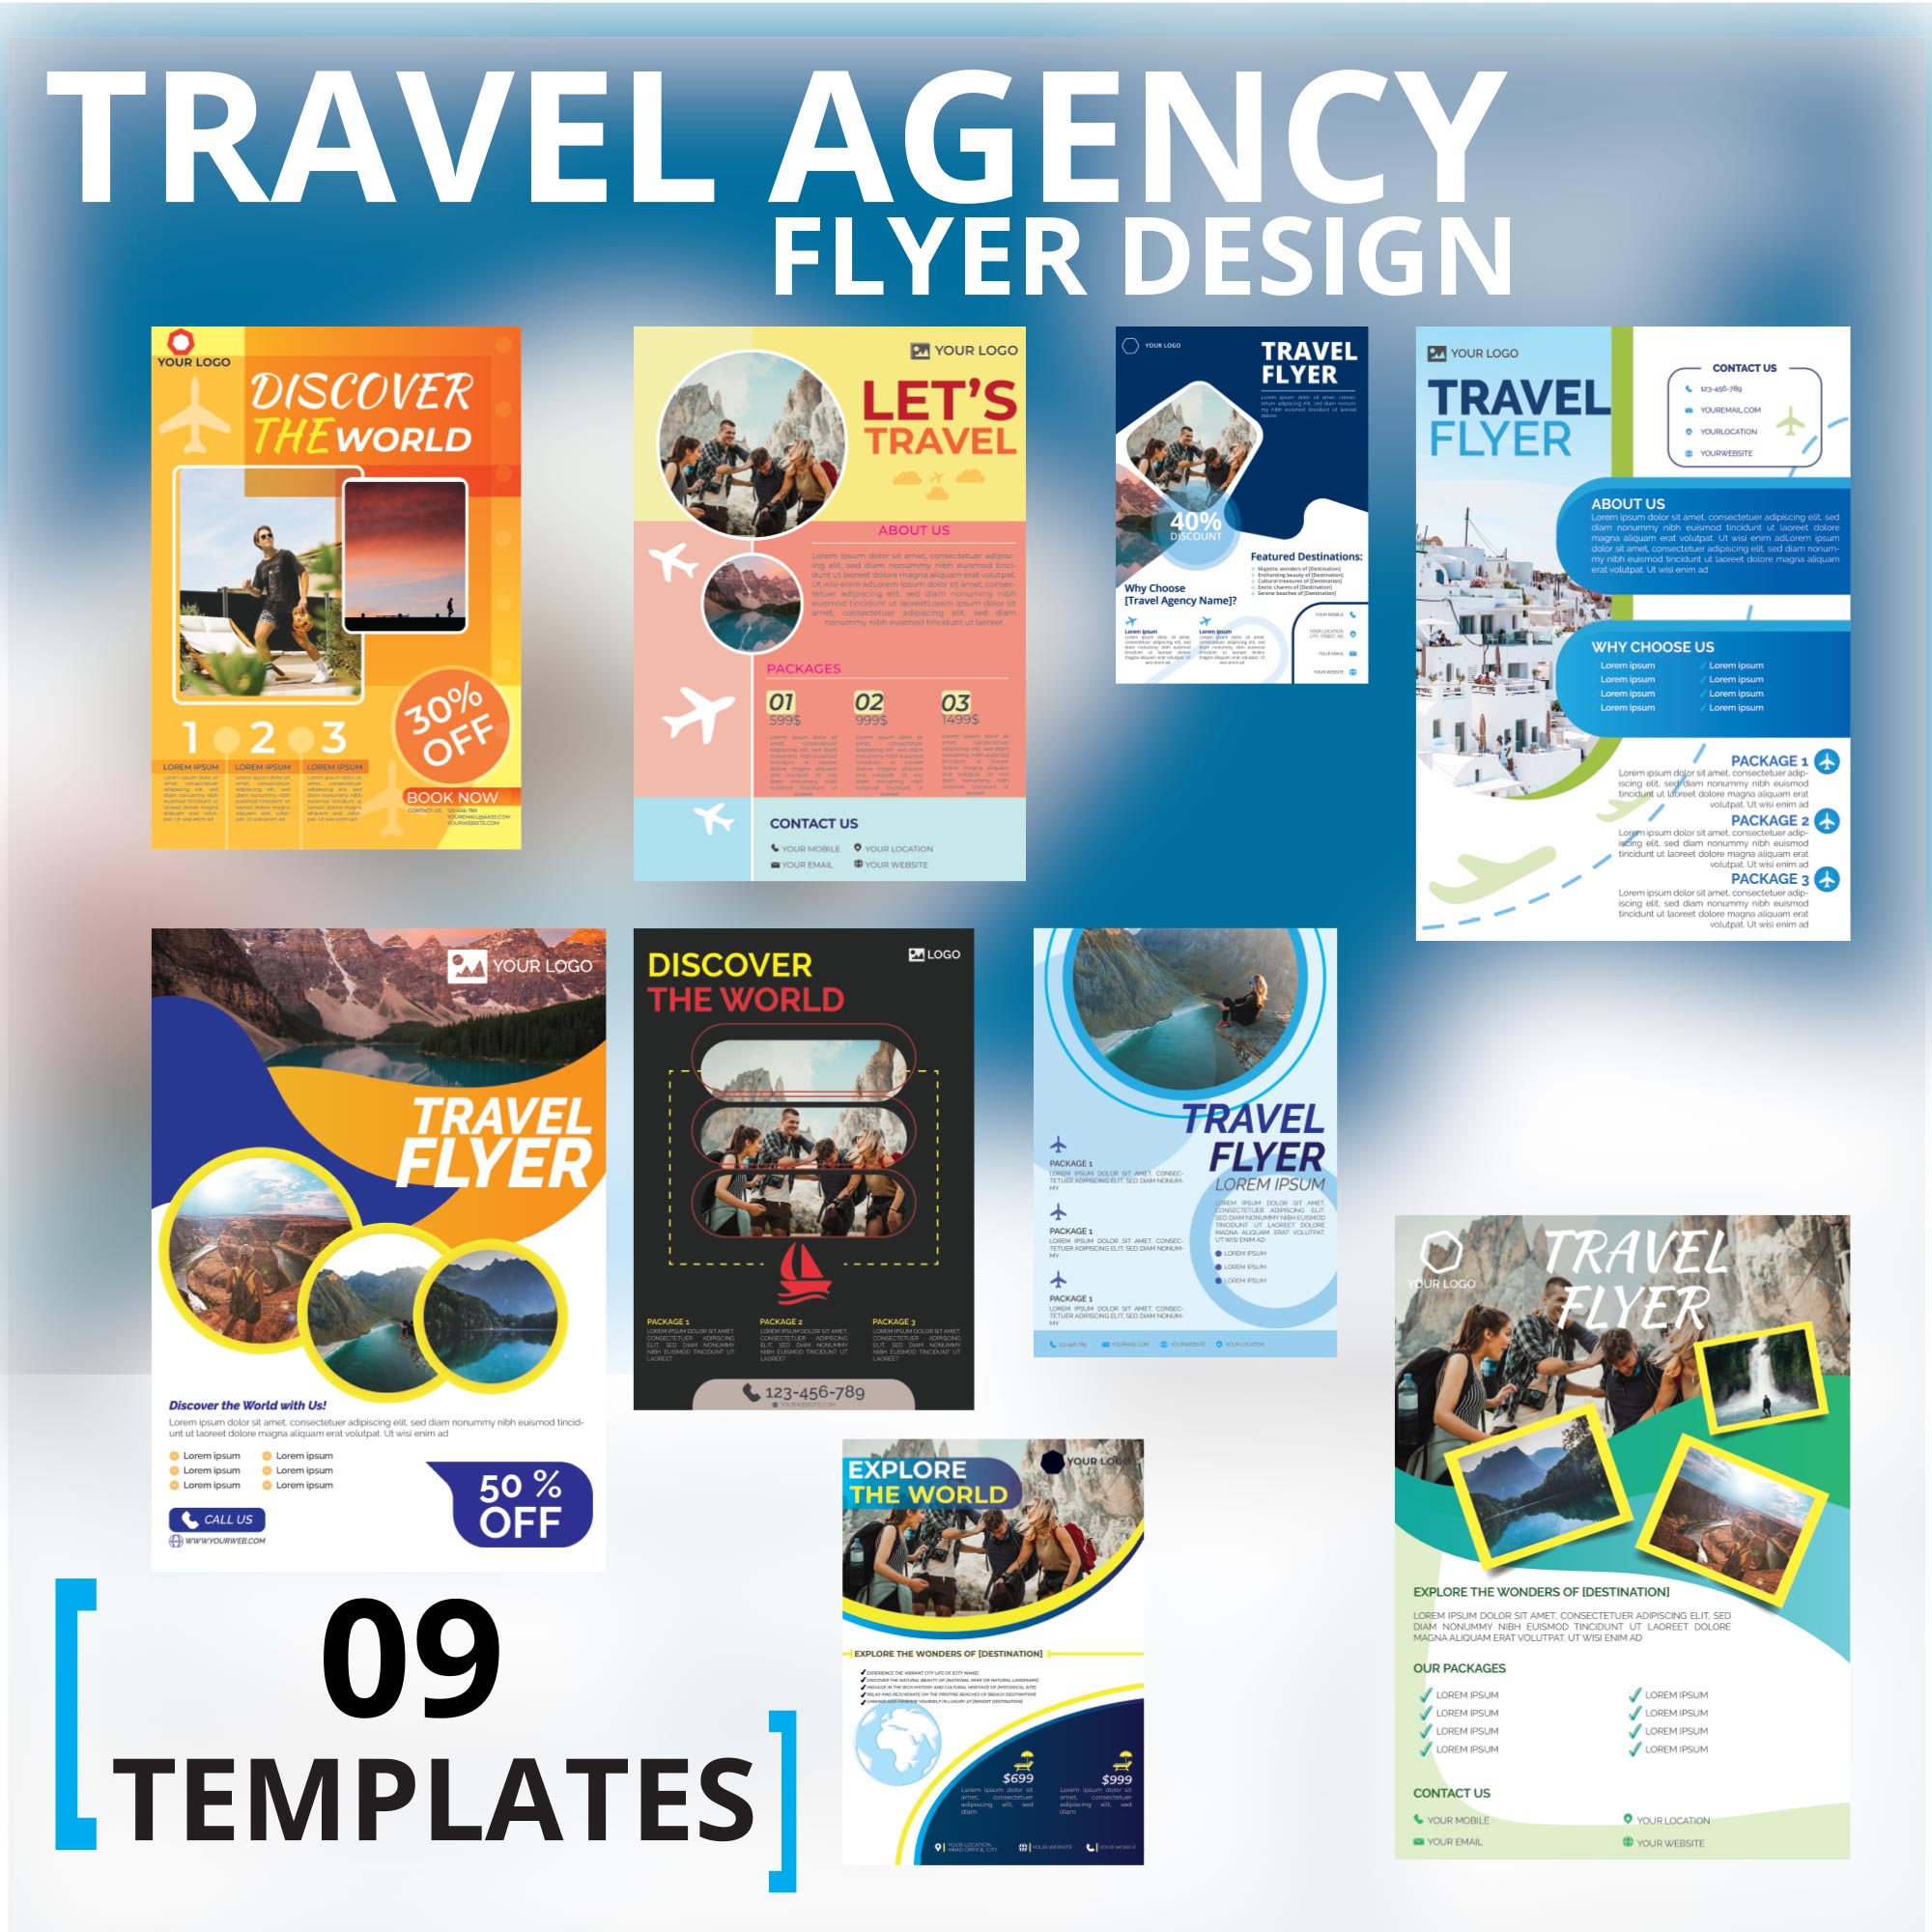 Travel agency flyer design templates cover image.